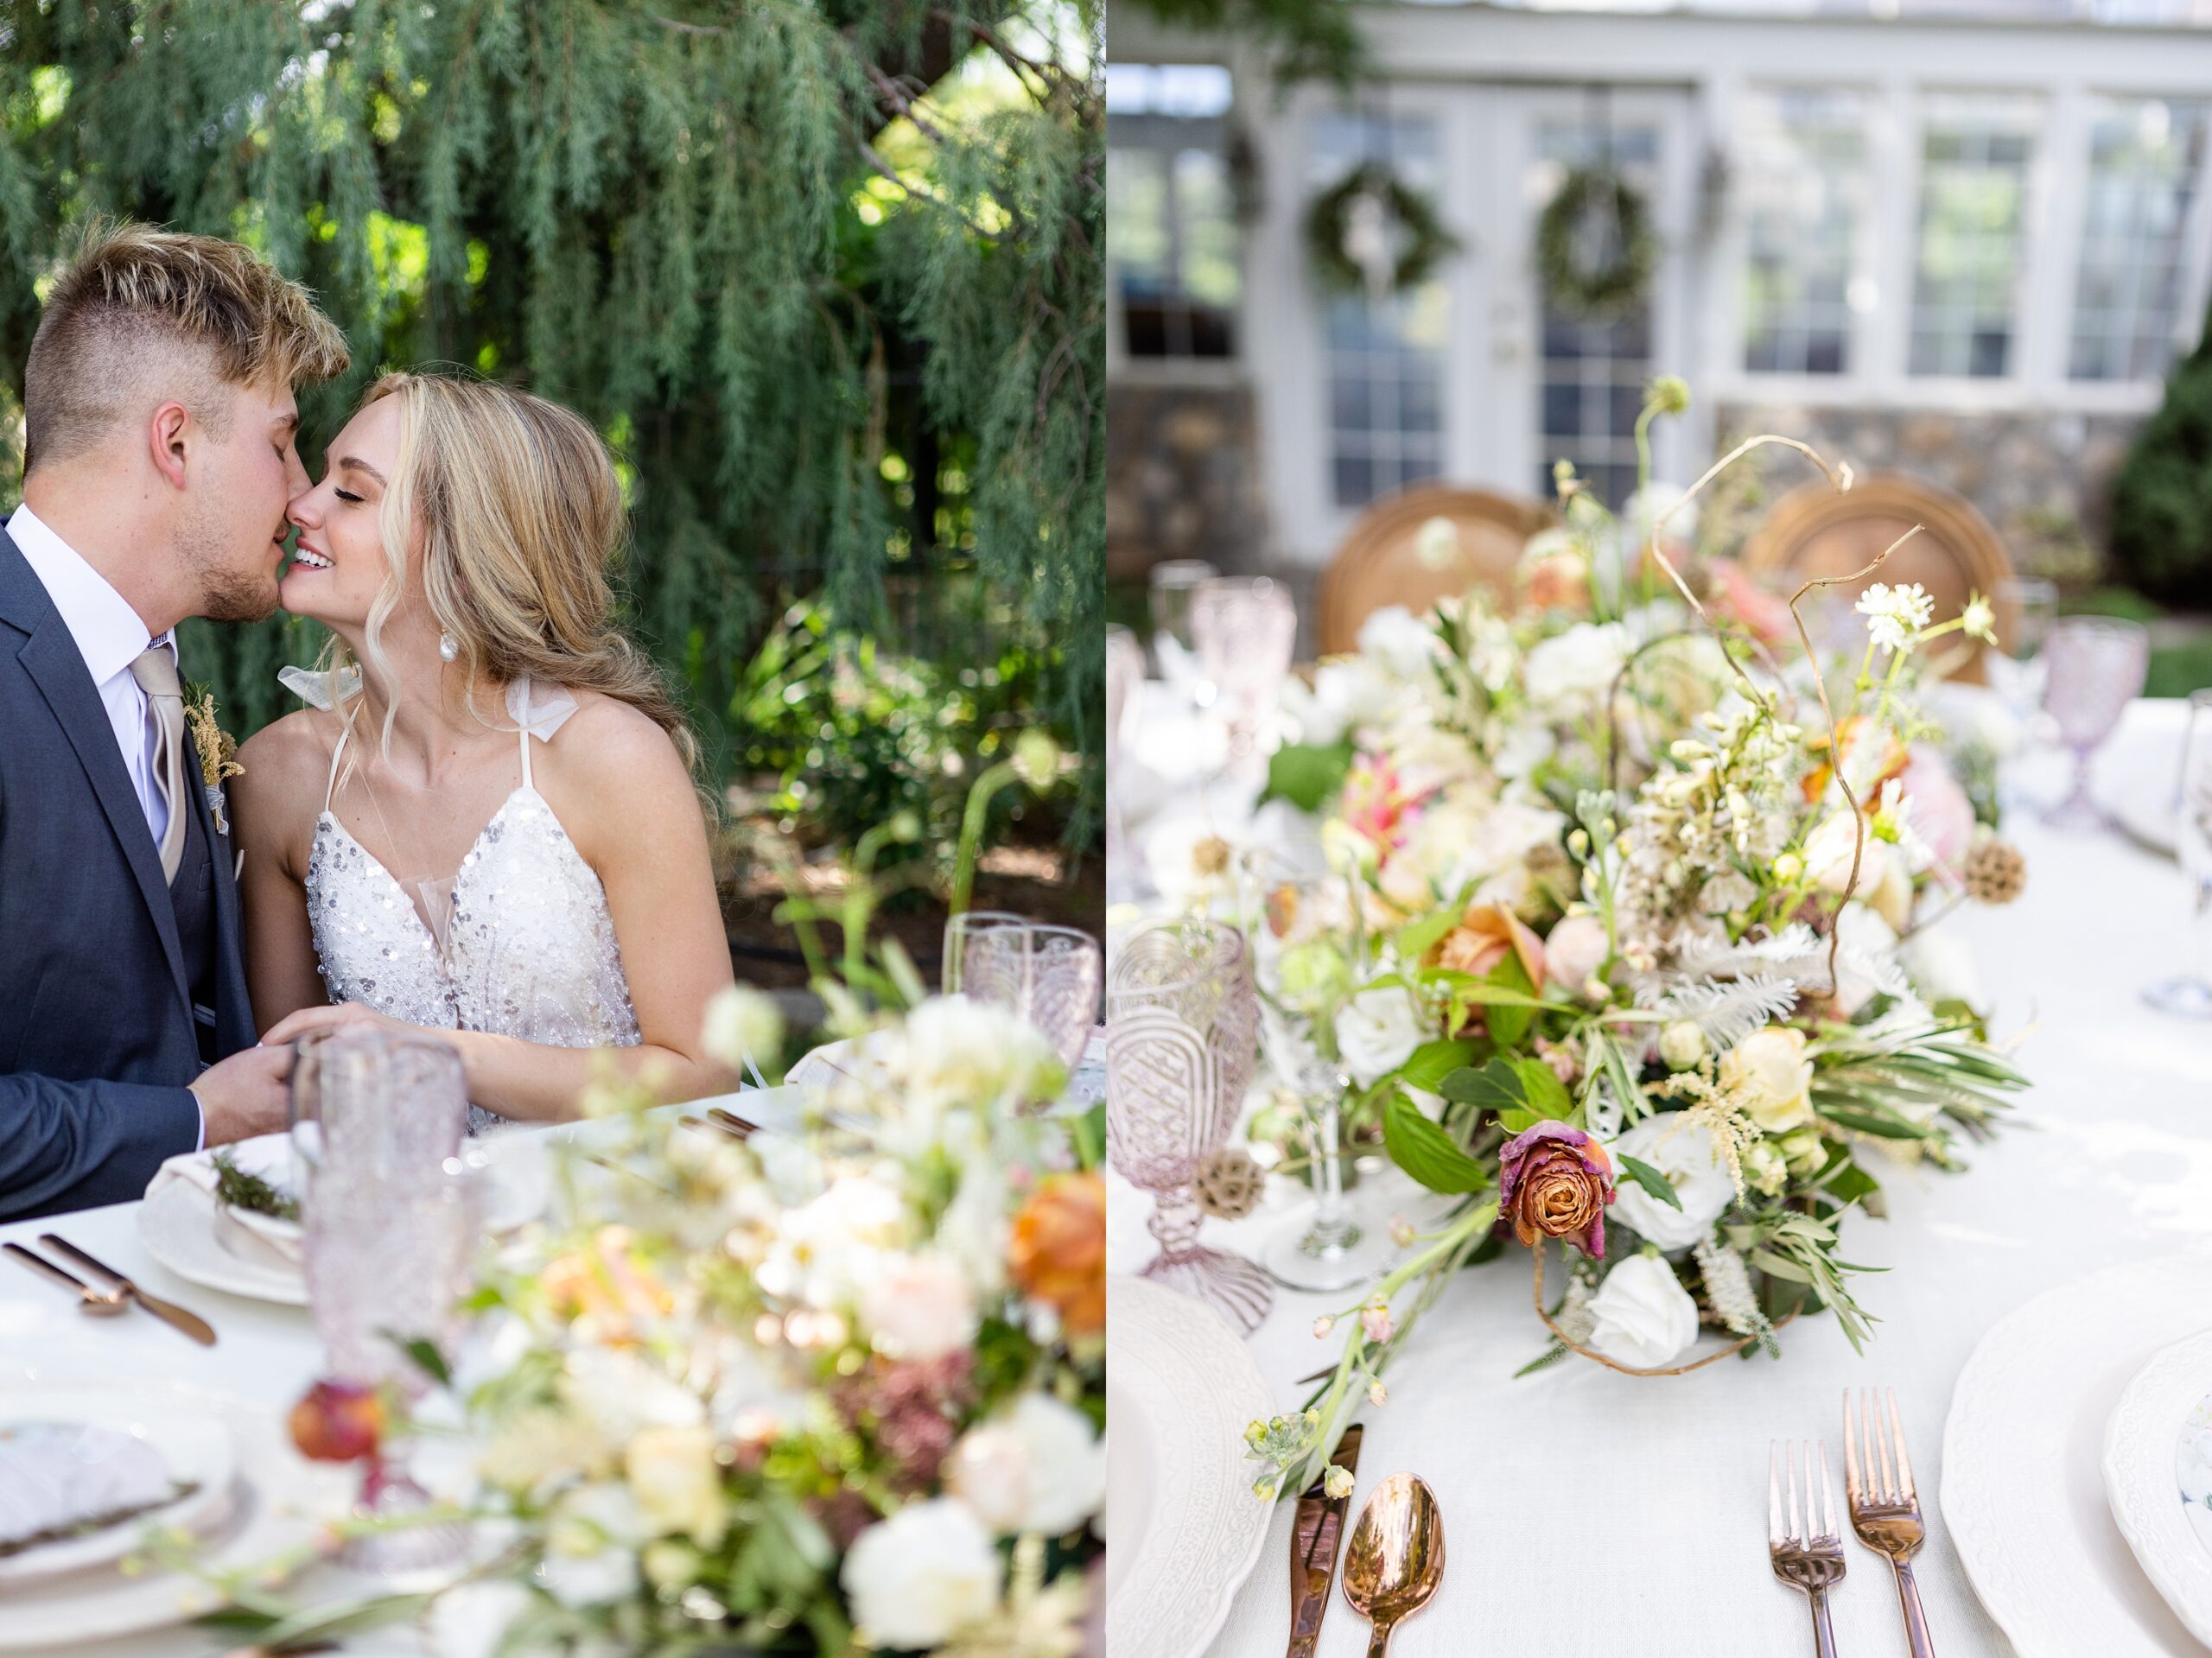 Genoa Lakes Golf Course Wedding day full of beautiful florals and intimate moments